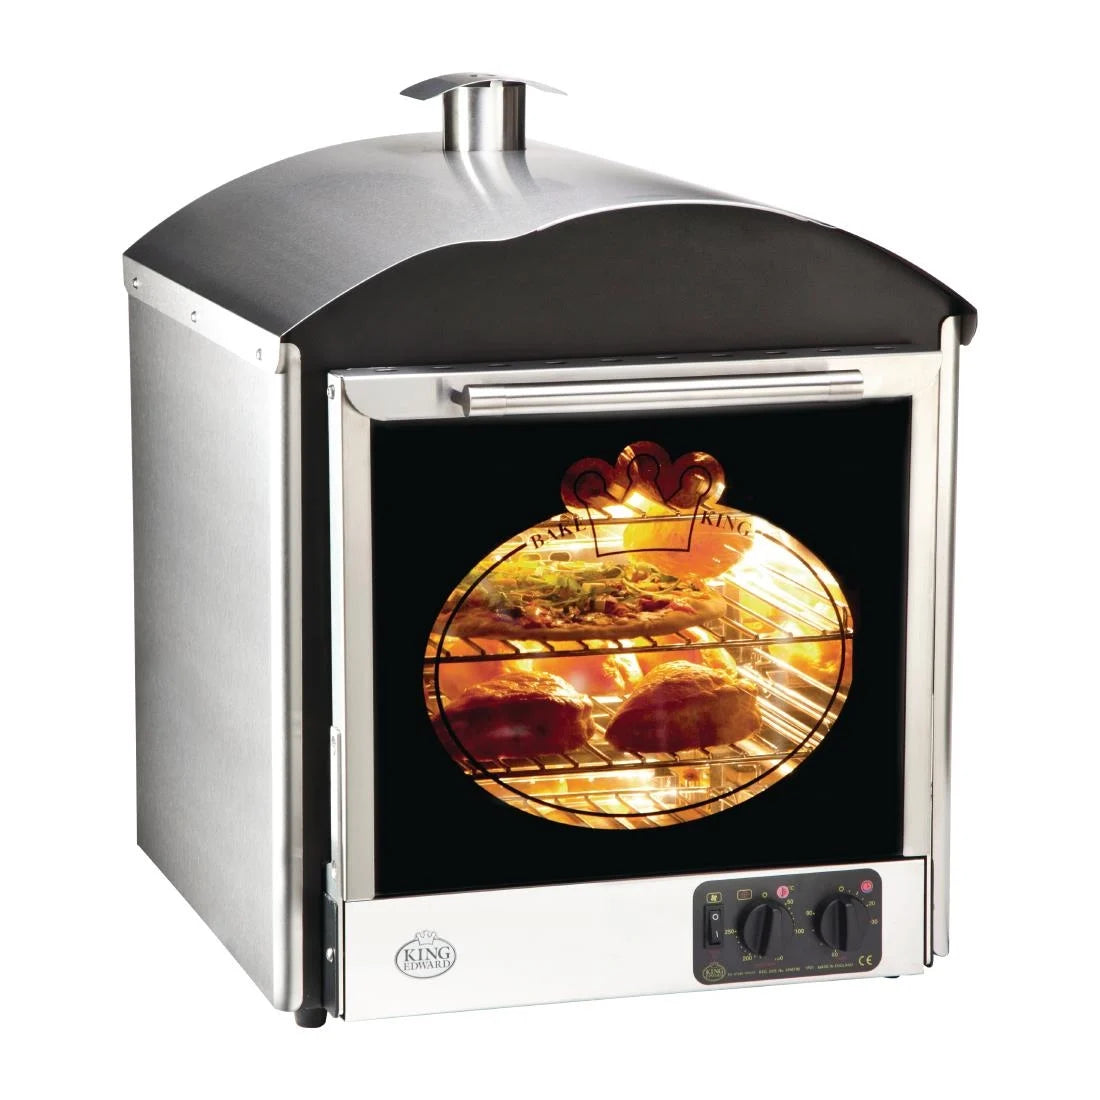 King Edward Bake King Solo Oven Stainless Steel BKS-SS.Product Ref:00676.Model:BKS-SS. 🚚 3-5 Days Delivery